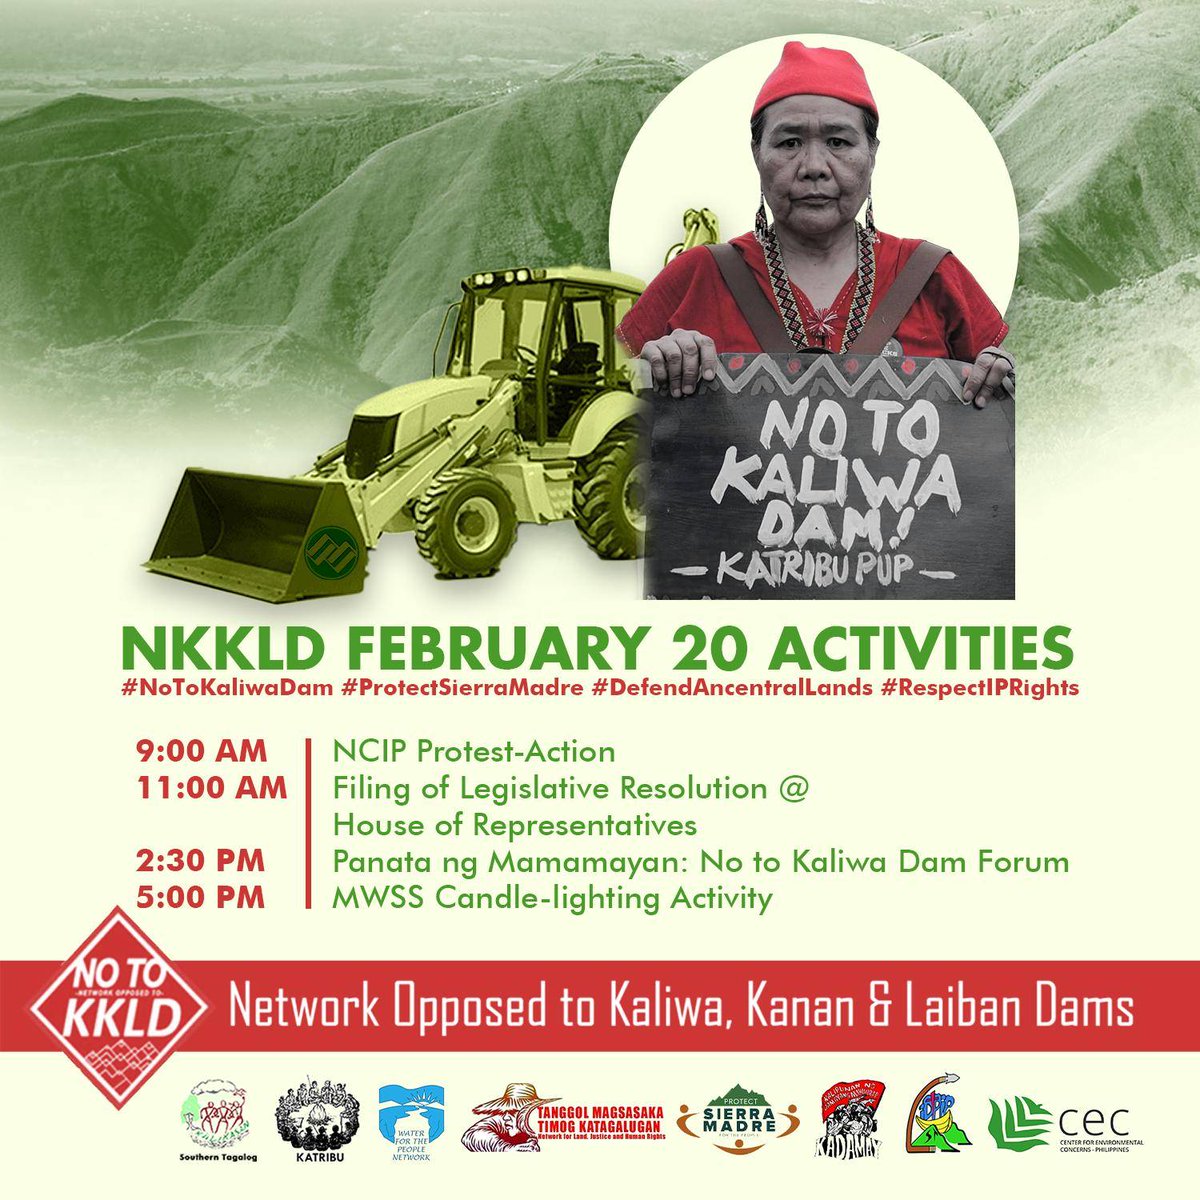 BAYAN TK supports the Network Opposed to Kaliwa, Kanan, and Laiban Dams (NKKLD) in its series of activities to be conducted tomorrow, February 20.

We encourage everyone to join said activities. Let us support the campaign to stop the construction of Kaliwa dam!

#NoToKaliwaDam